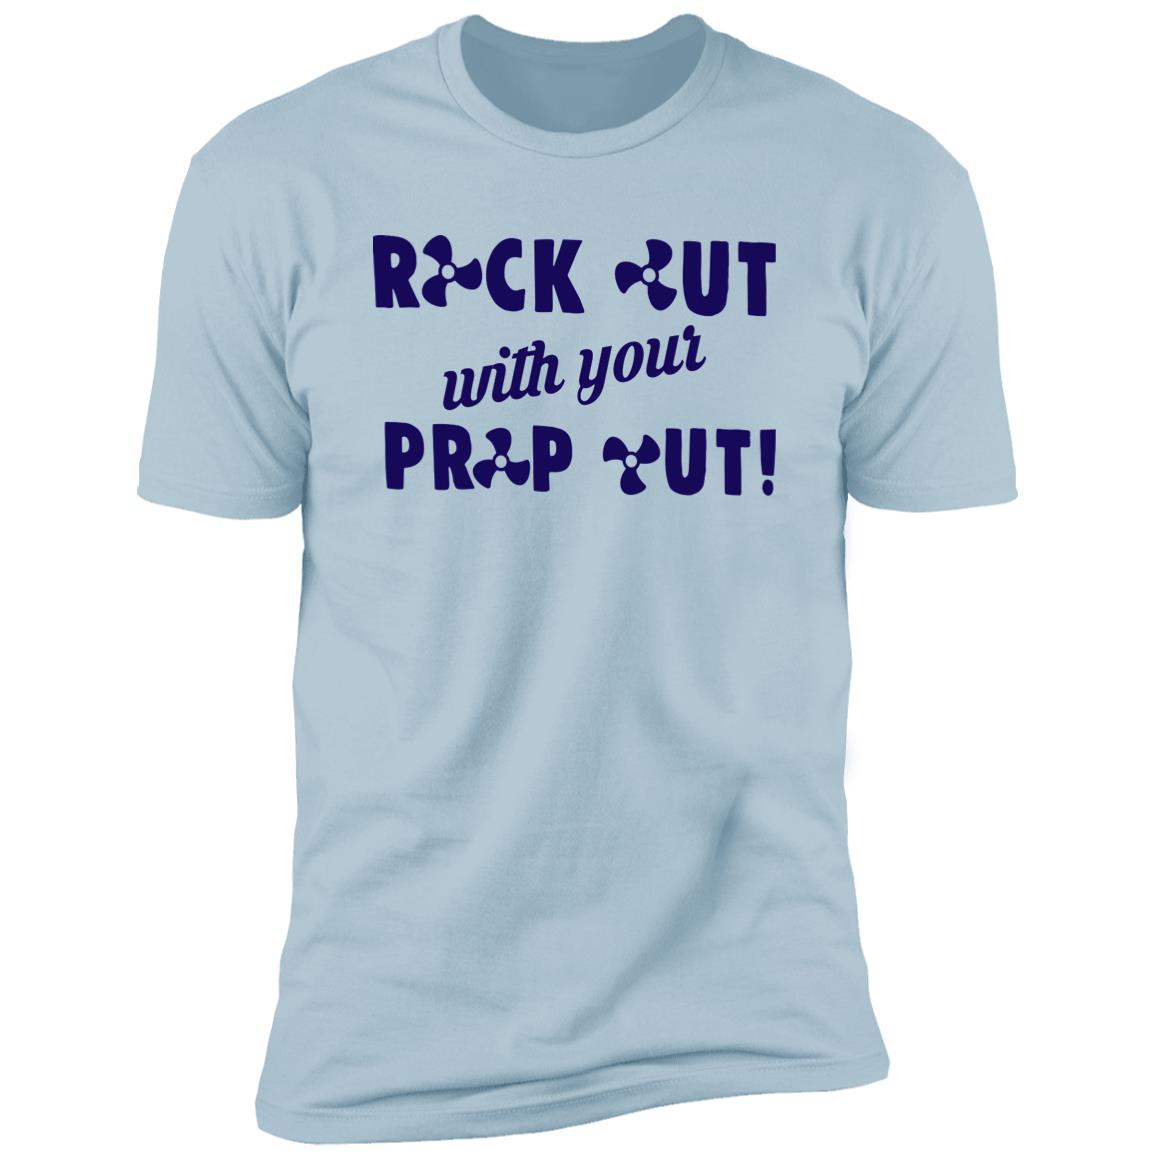 ***2 SIDED***  HRCL FL - Navy Rock Out with your Prop Out - 2 Sided NL3600 Premium Short Sleeve T-Shirt